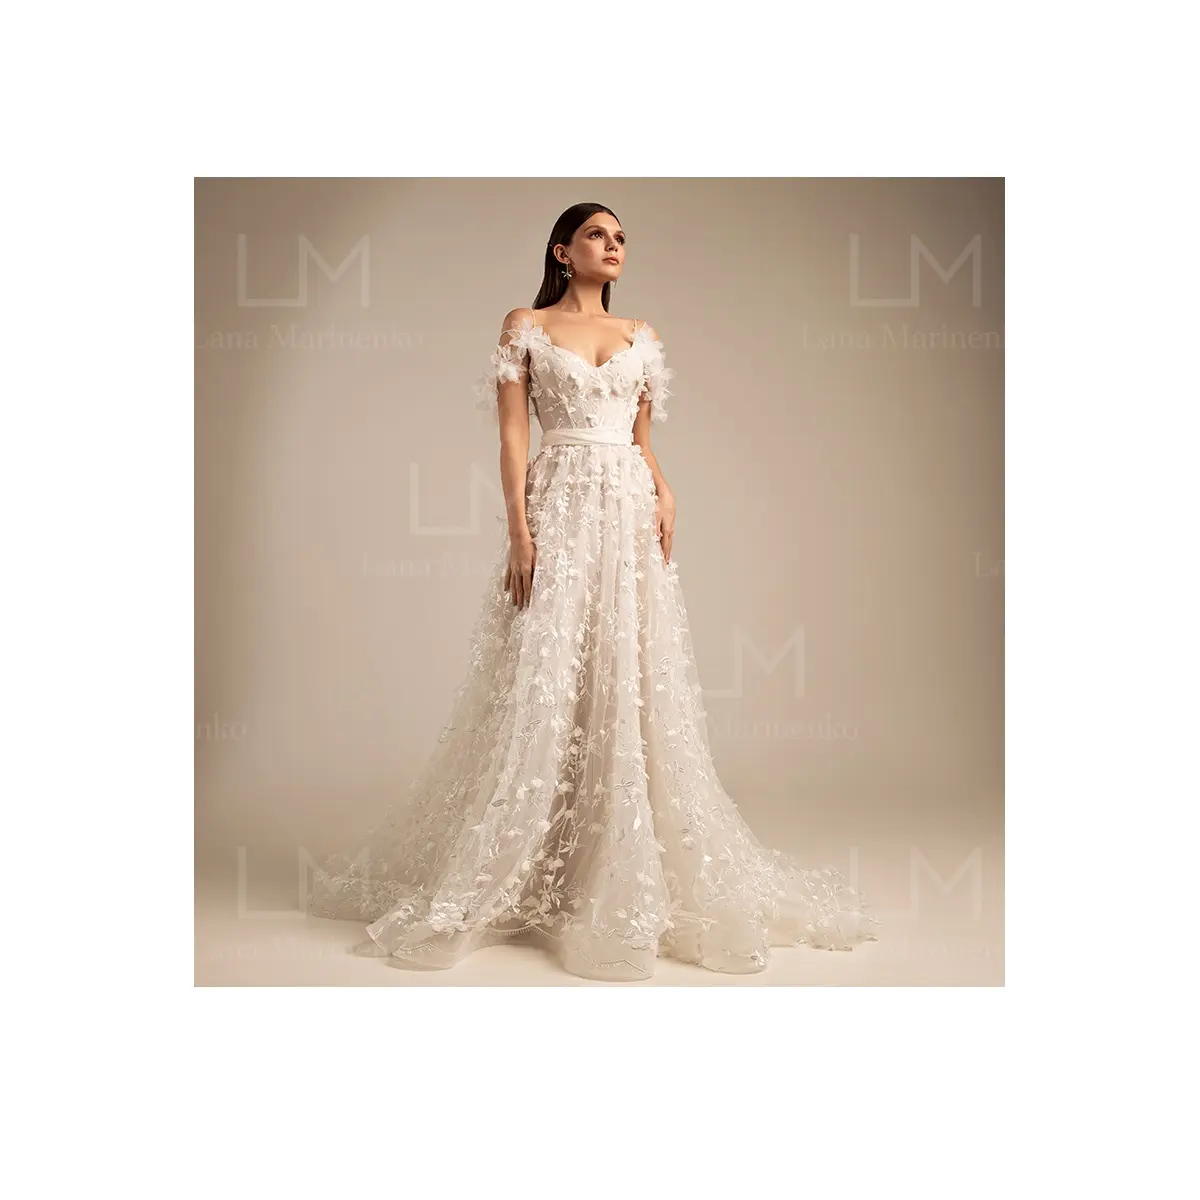 Beautiful flower lace tulle fabric with lace open back A-line "Flora" wedding dress with detachable sleeves and train for bride